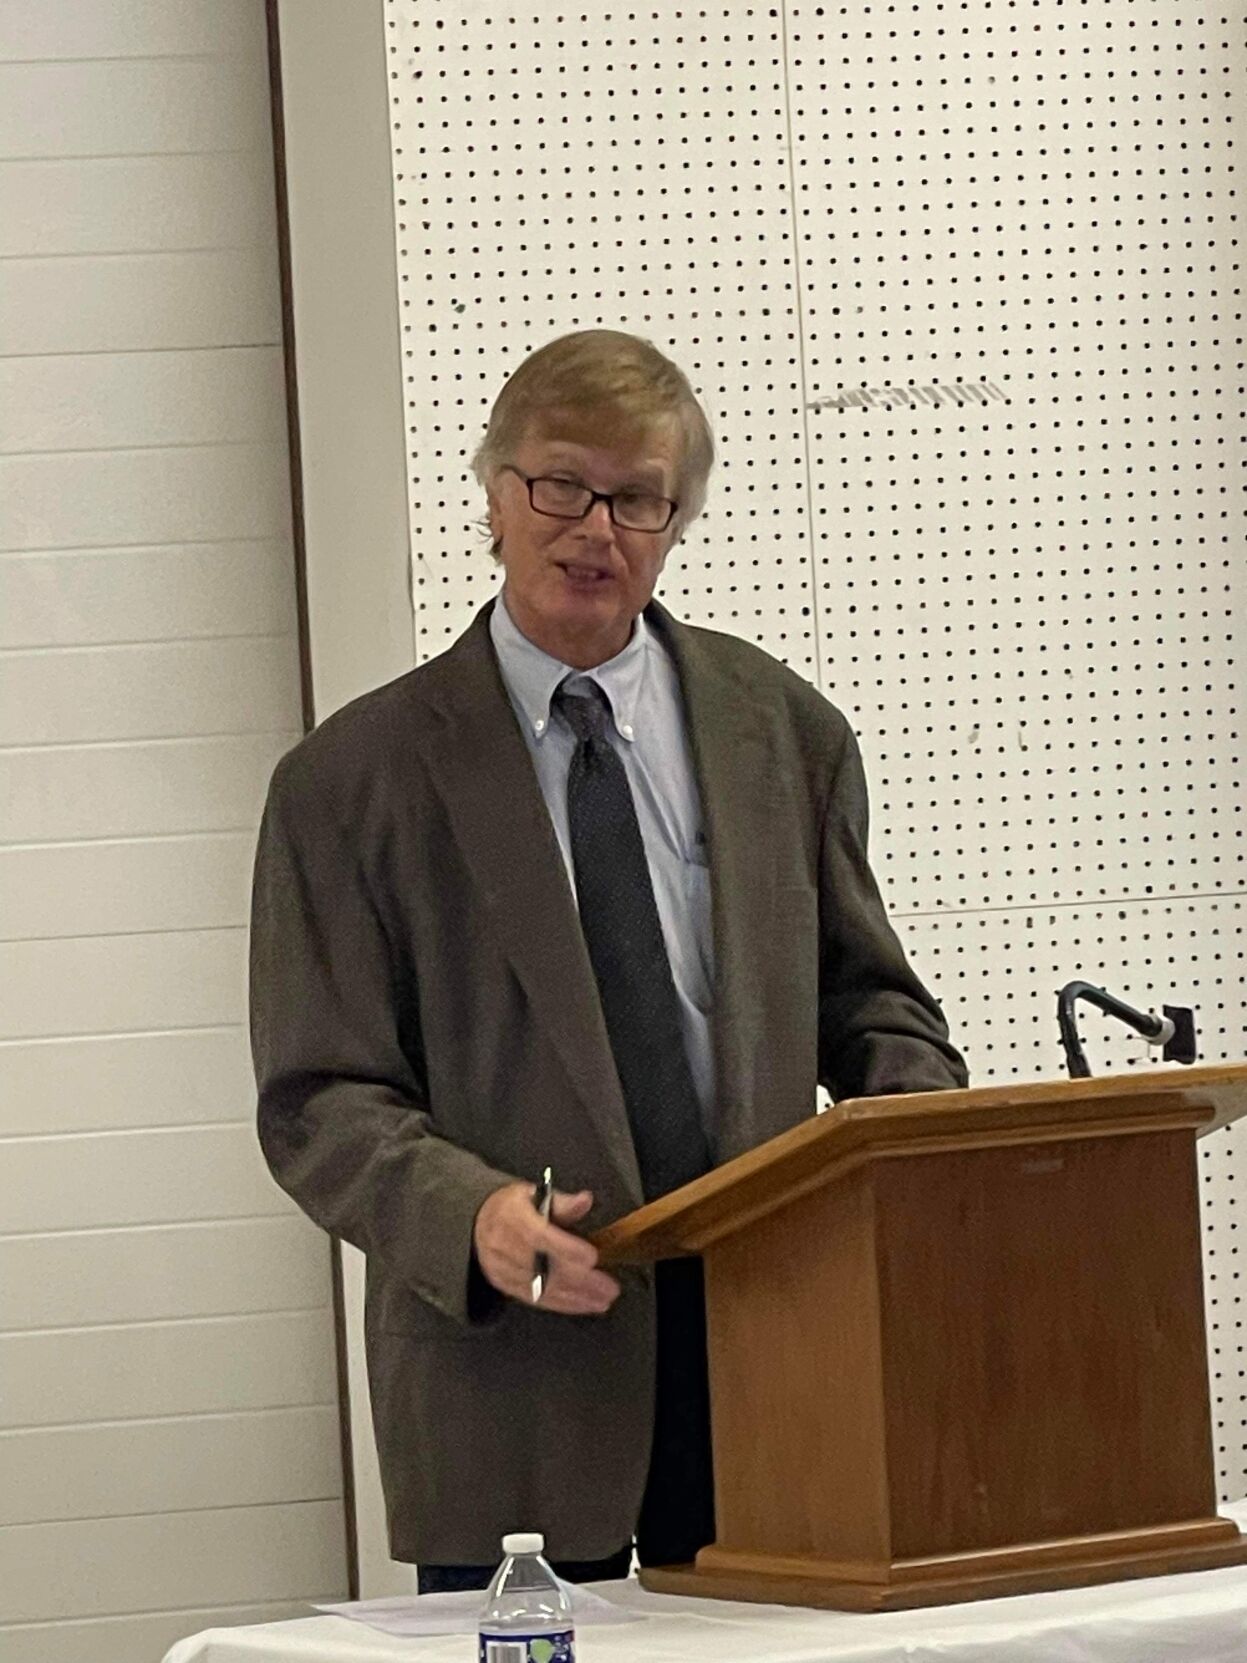 High Plains Journal Editor Dave Bergmeier served as emcee for the Ranch Conversation event in Buffalo, Oklahoma. (Journal photo by Bettye Lovelace.)